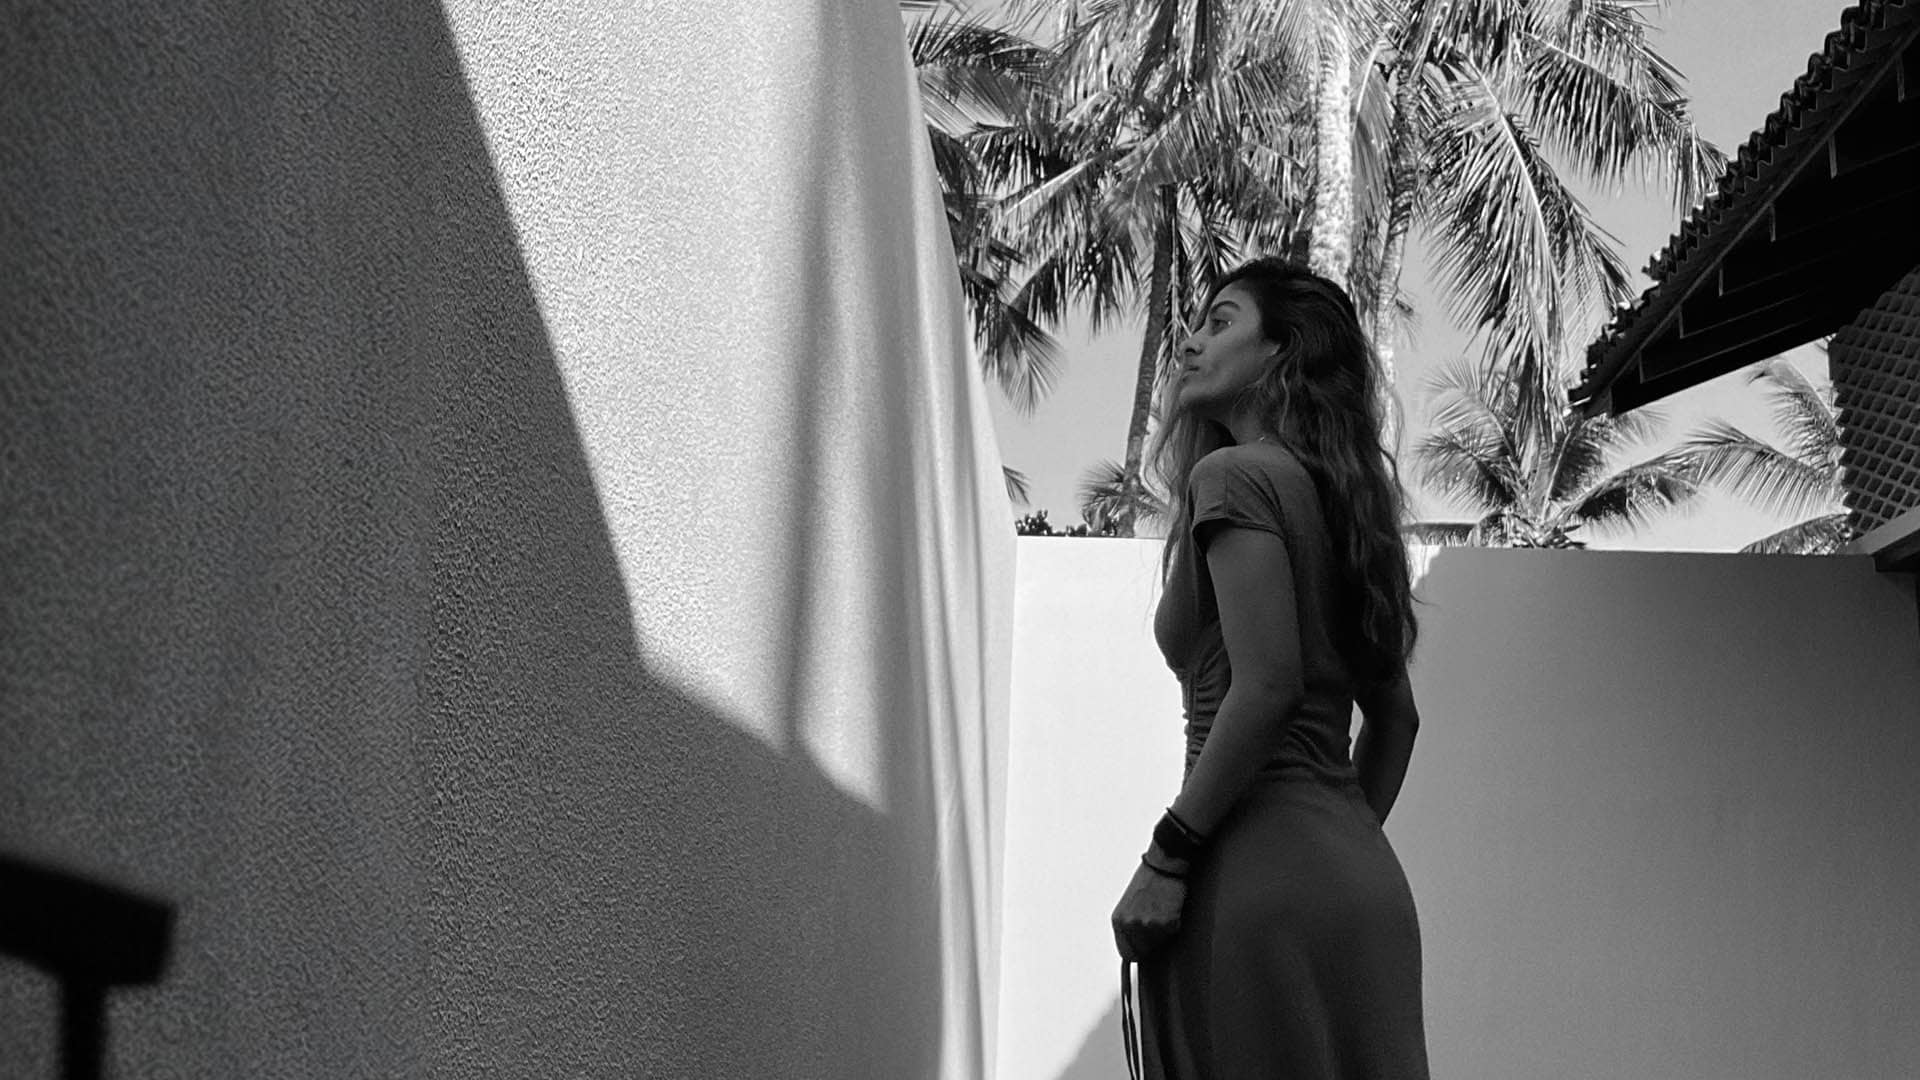 Angie Perera pondering in palm shadows